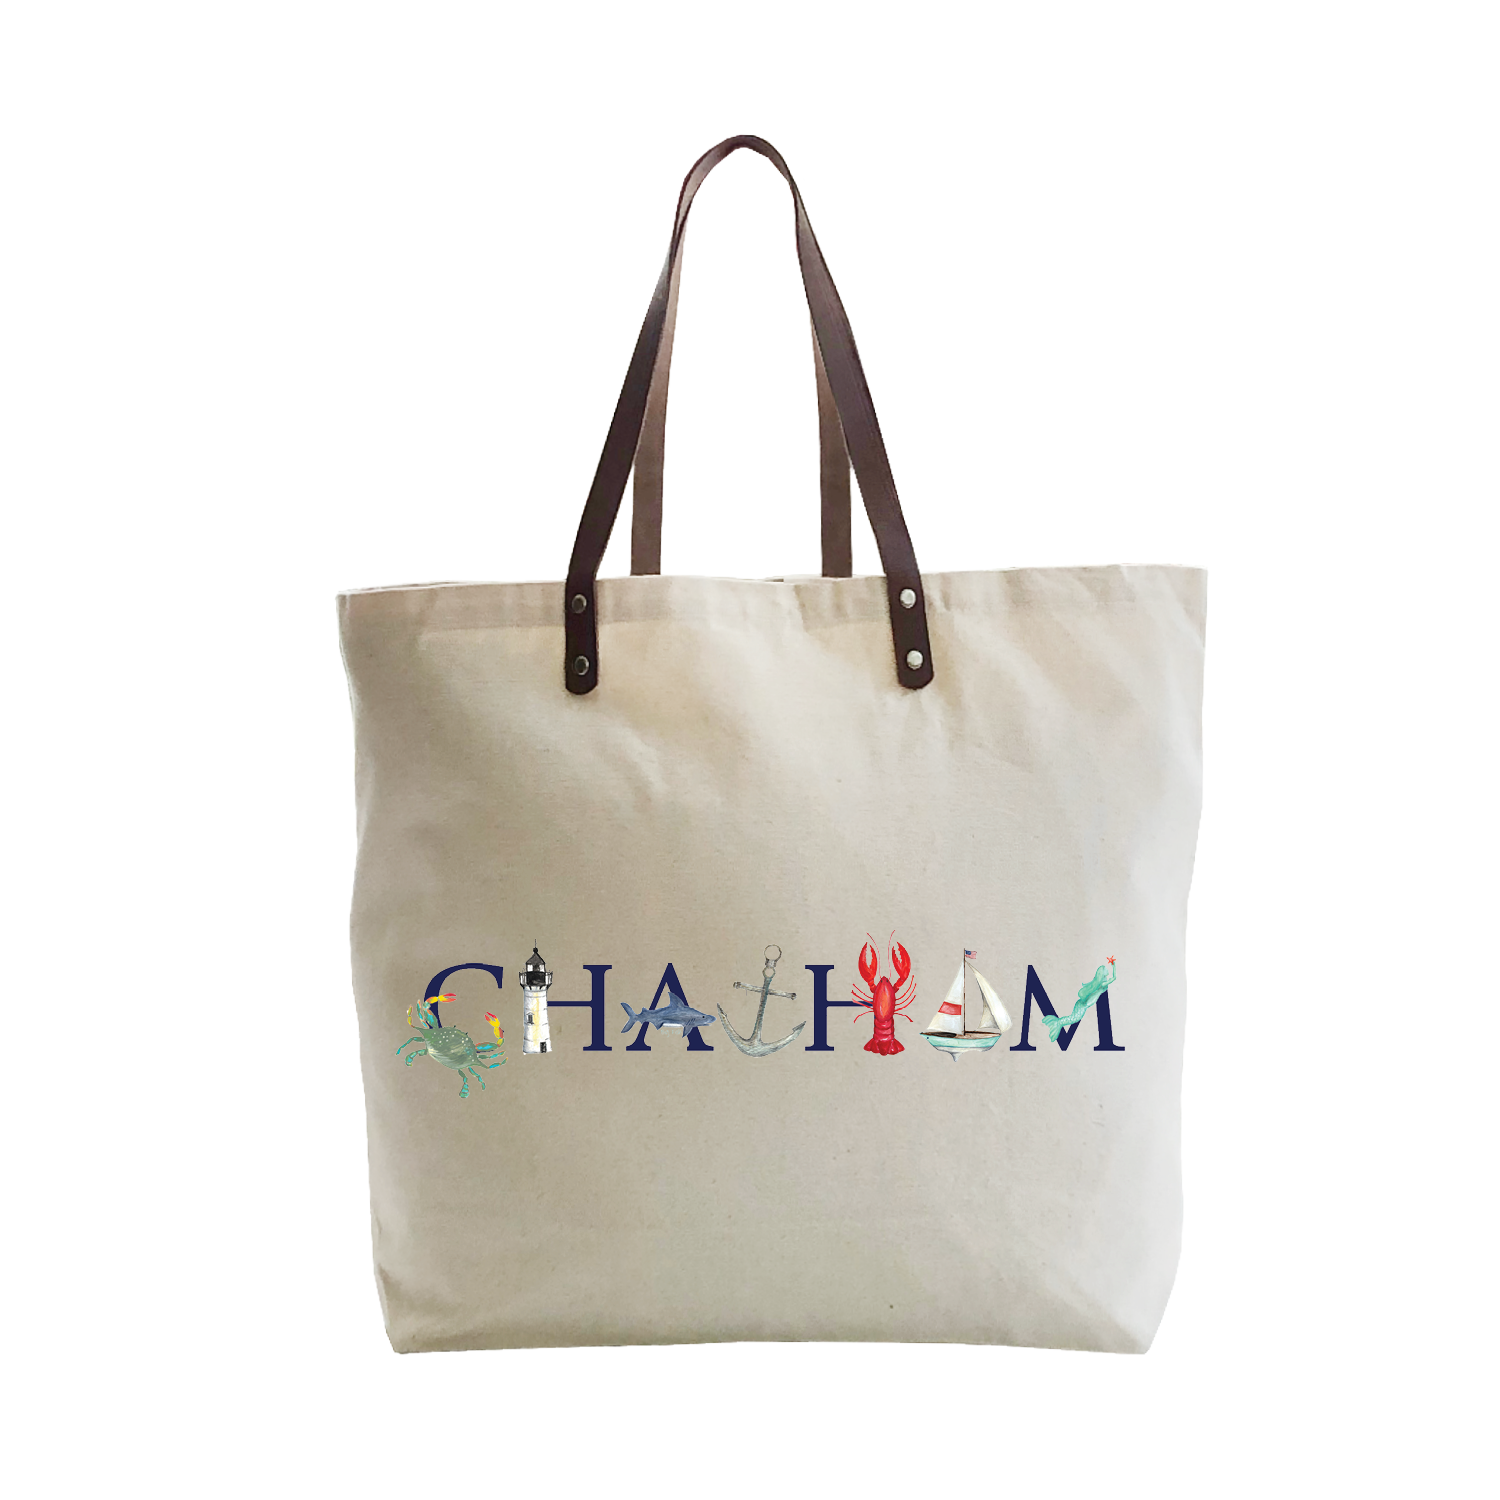 chatham large tote